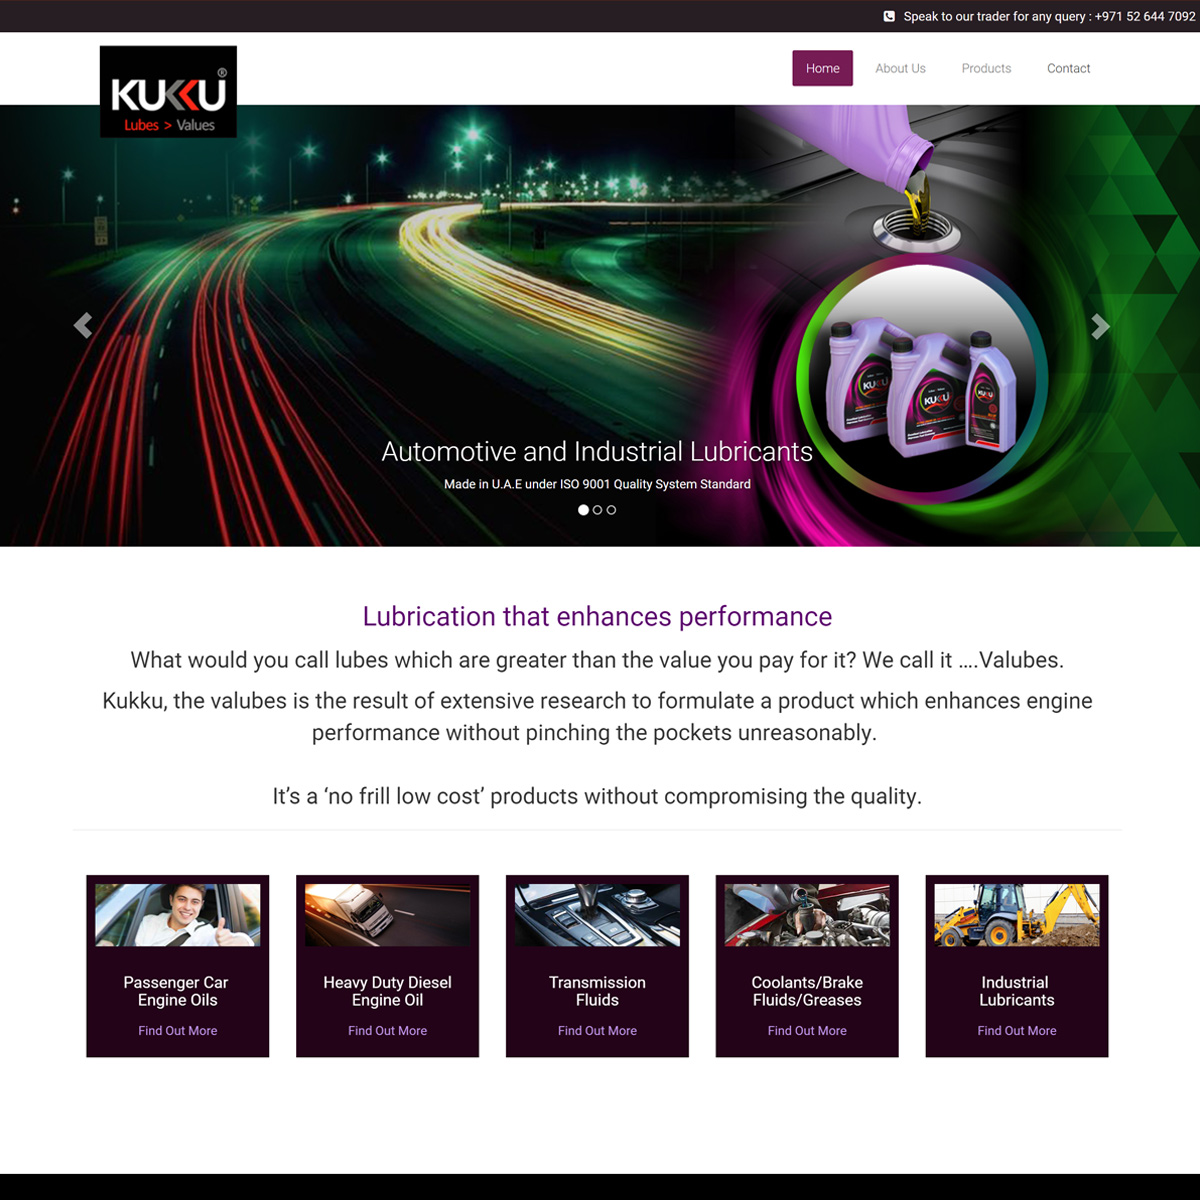 Mobile Ready Website For Automobiles & Industrial Lubricants Trading Company